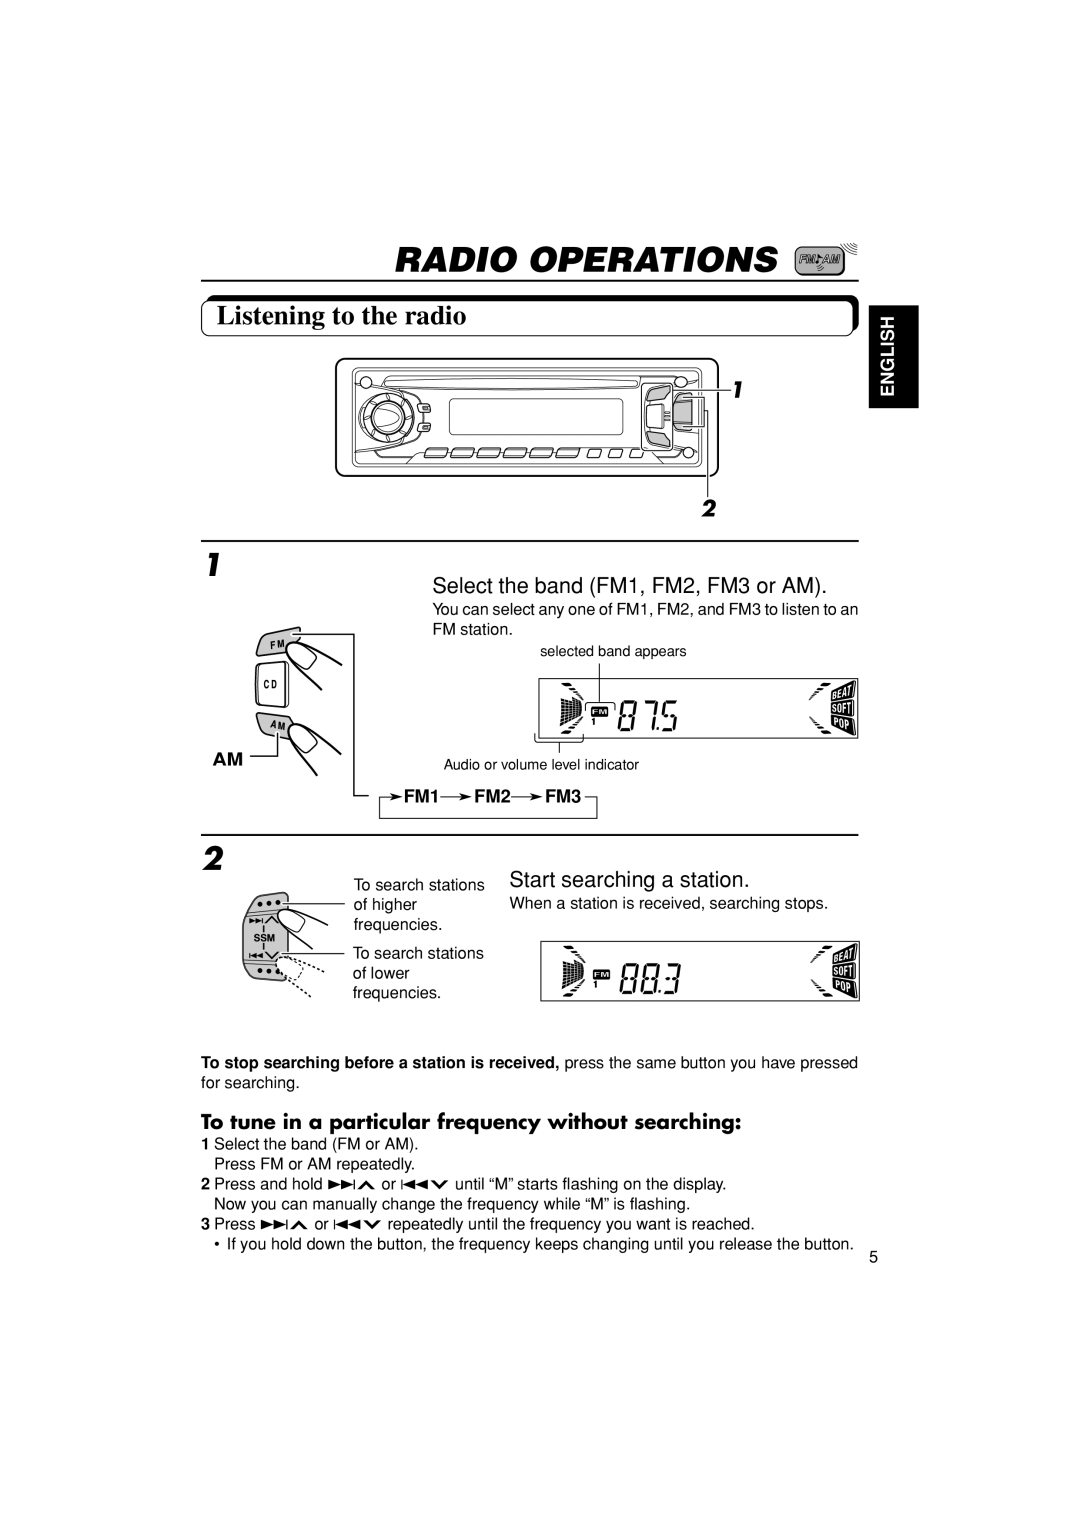 JVC KD-S670 manual Radio Operations, Listening to the radio, Select the band FM1, FM2, FM3 or AM, Start searching a station 